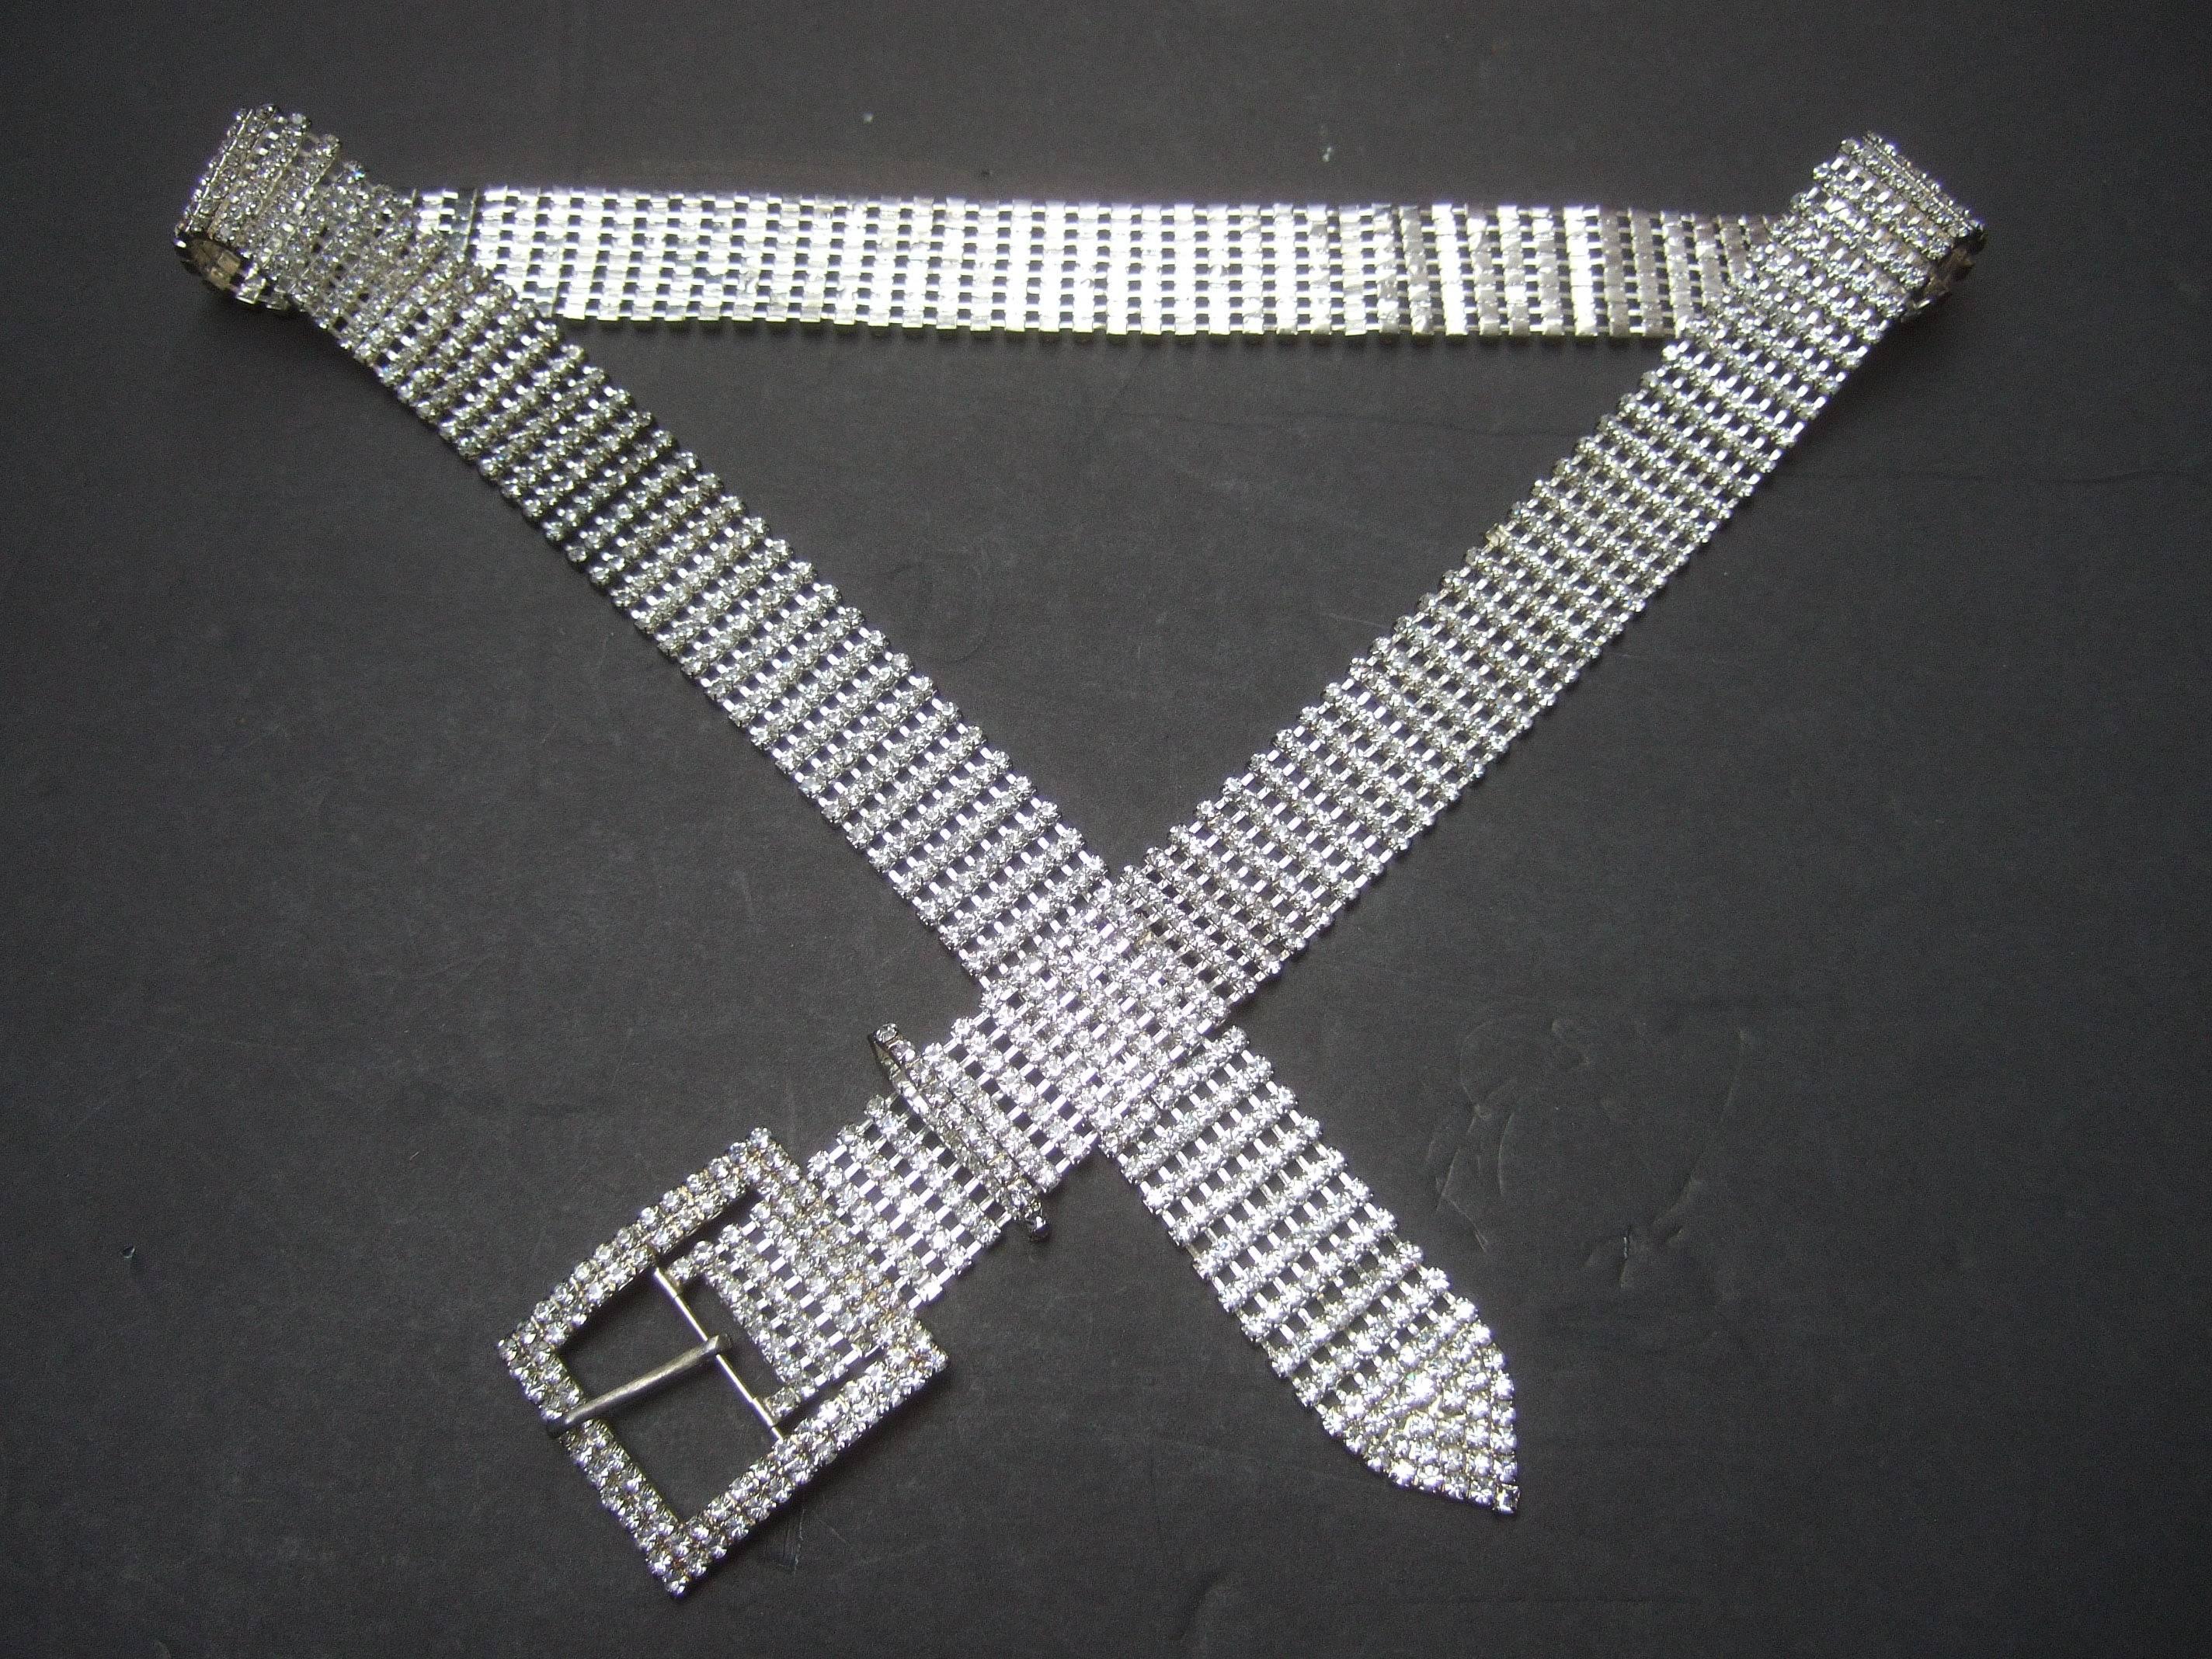 Diamante clear glittering crystal rhinestone link belt c 1960s 
The elegant belt is constructed with rows of clear rhinestone
crystals adhered to a silver rhodium plated metal backing 

The waist crosses over numerous waist sizes up to 38 inches
Can